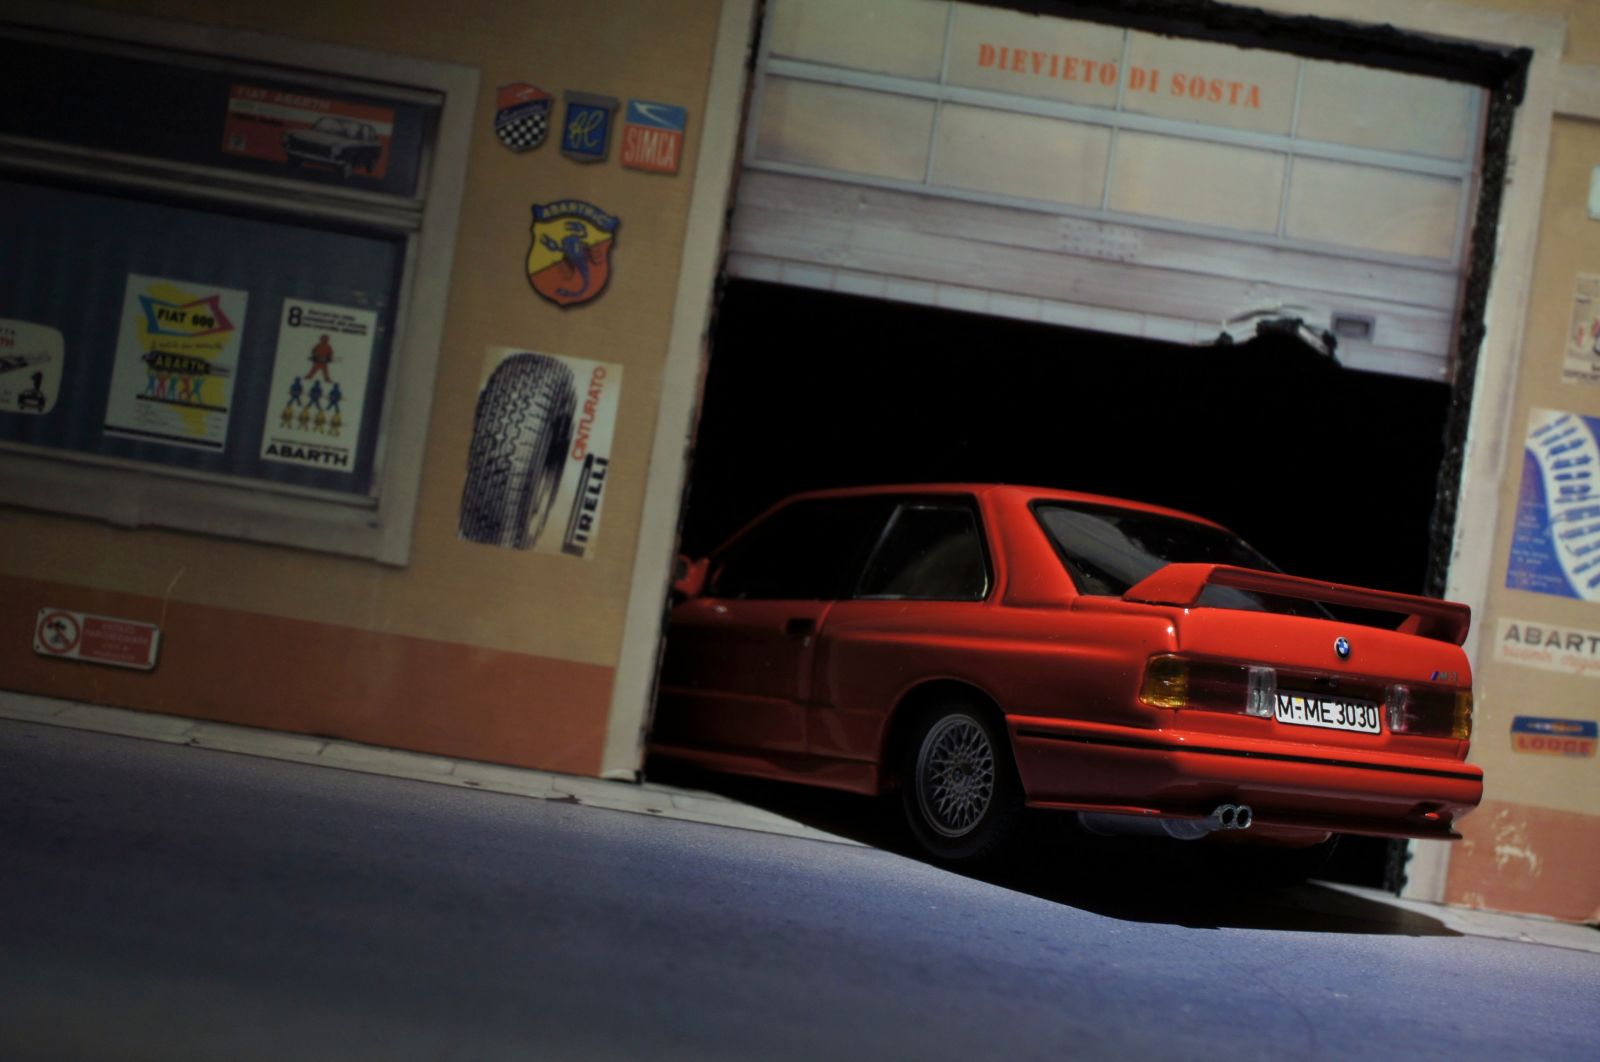 Illustration for article titled Teutonic Tuesday: Was ist denn das, noch einer E30 M3?